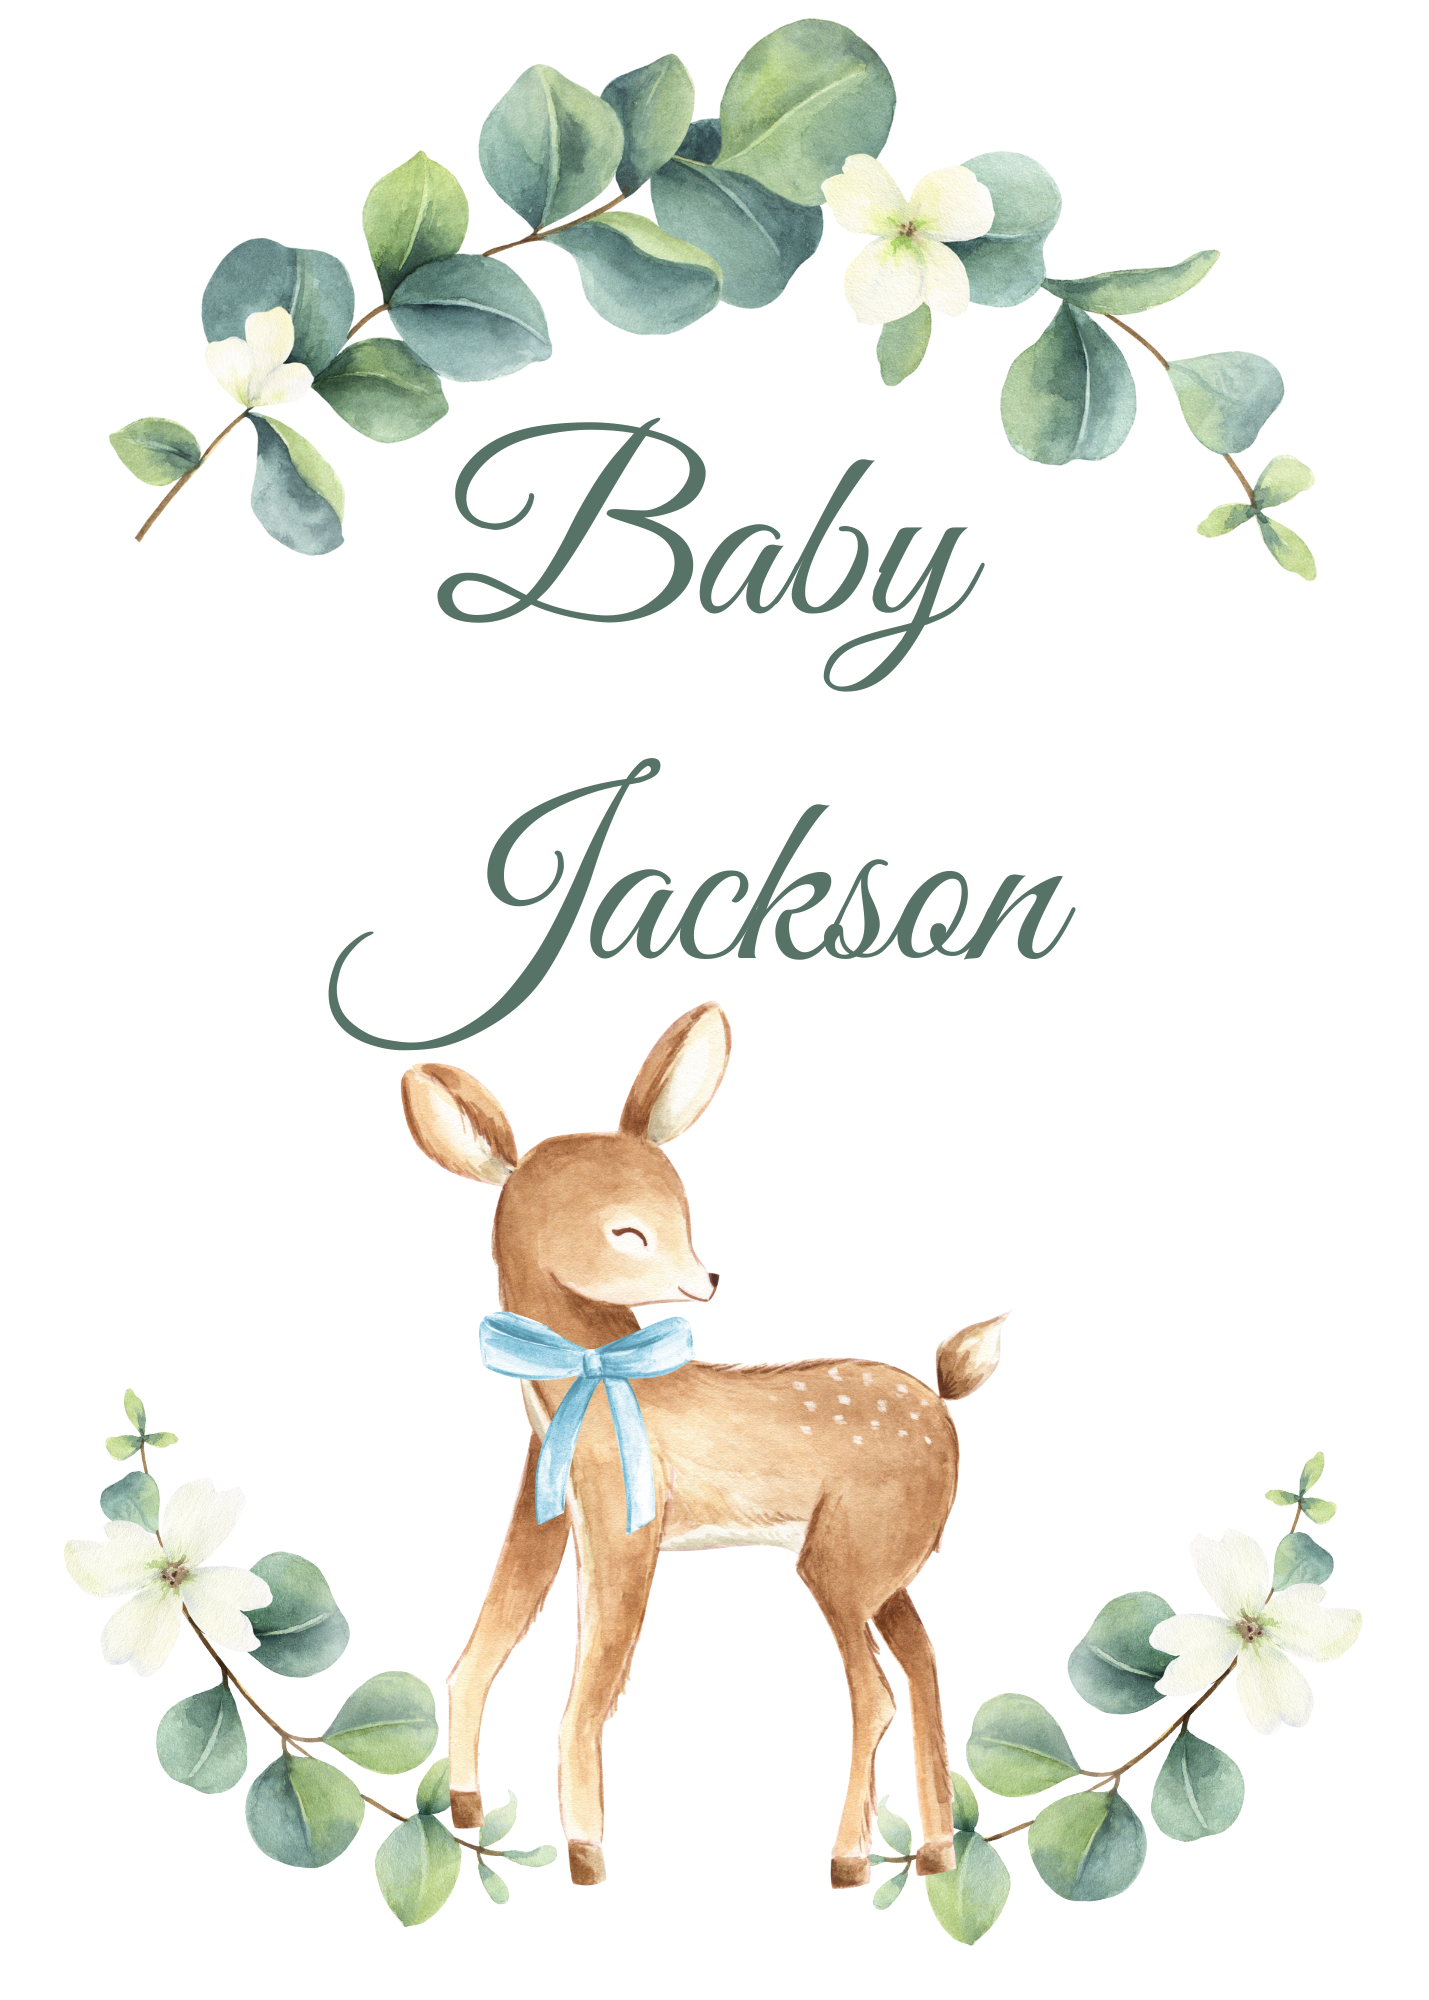 A Sweet Little Deer is Here - Invitation to Download